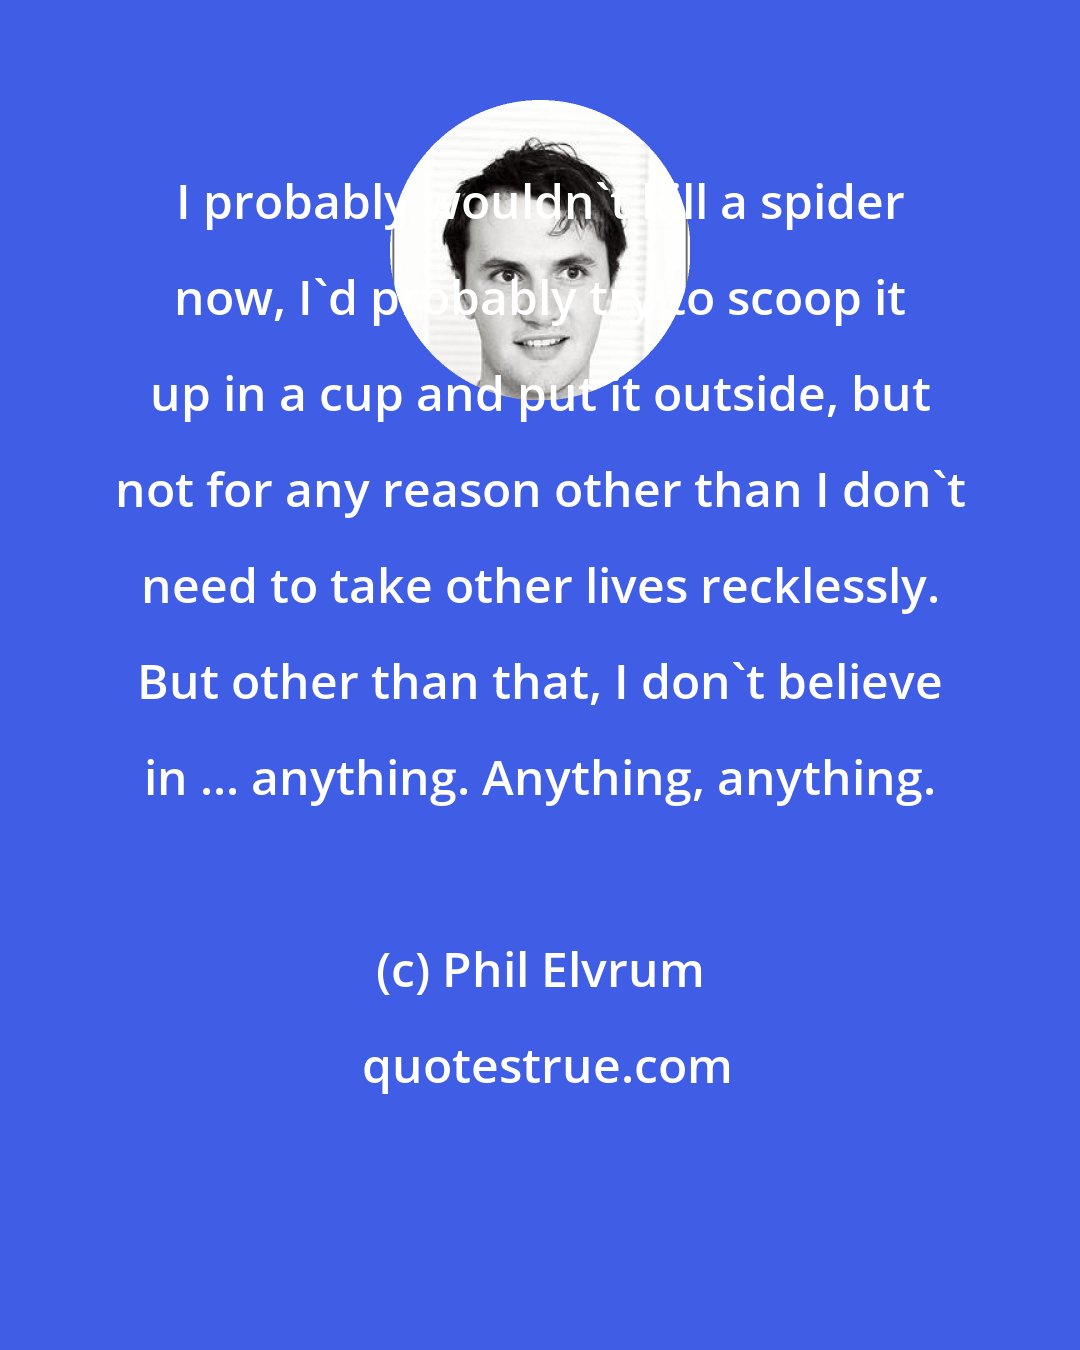 Phil Elvrum: I probably wouldn't kill a spider now, I'd probably try to scoop it up in a cup and put it outside, but not for any reason other than I don't need to take other lives recklessly. But other than that, I don't believe in ... anything. Anything, anything.